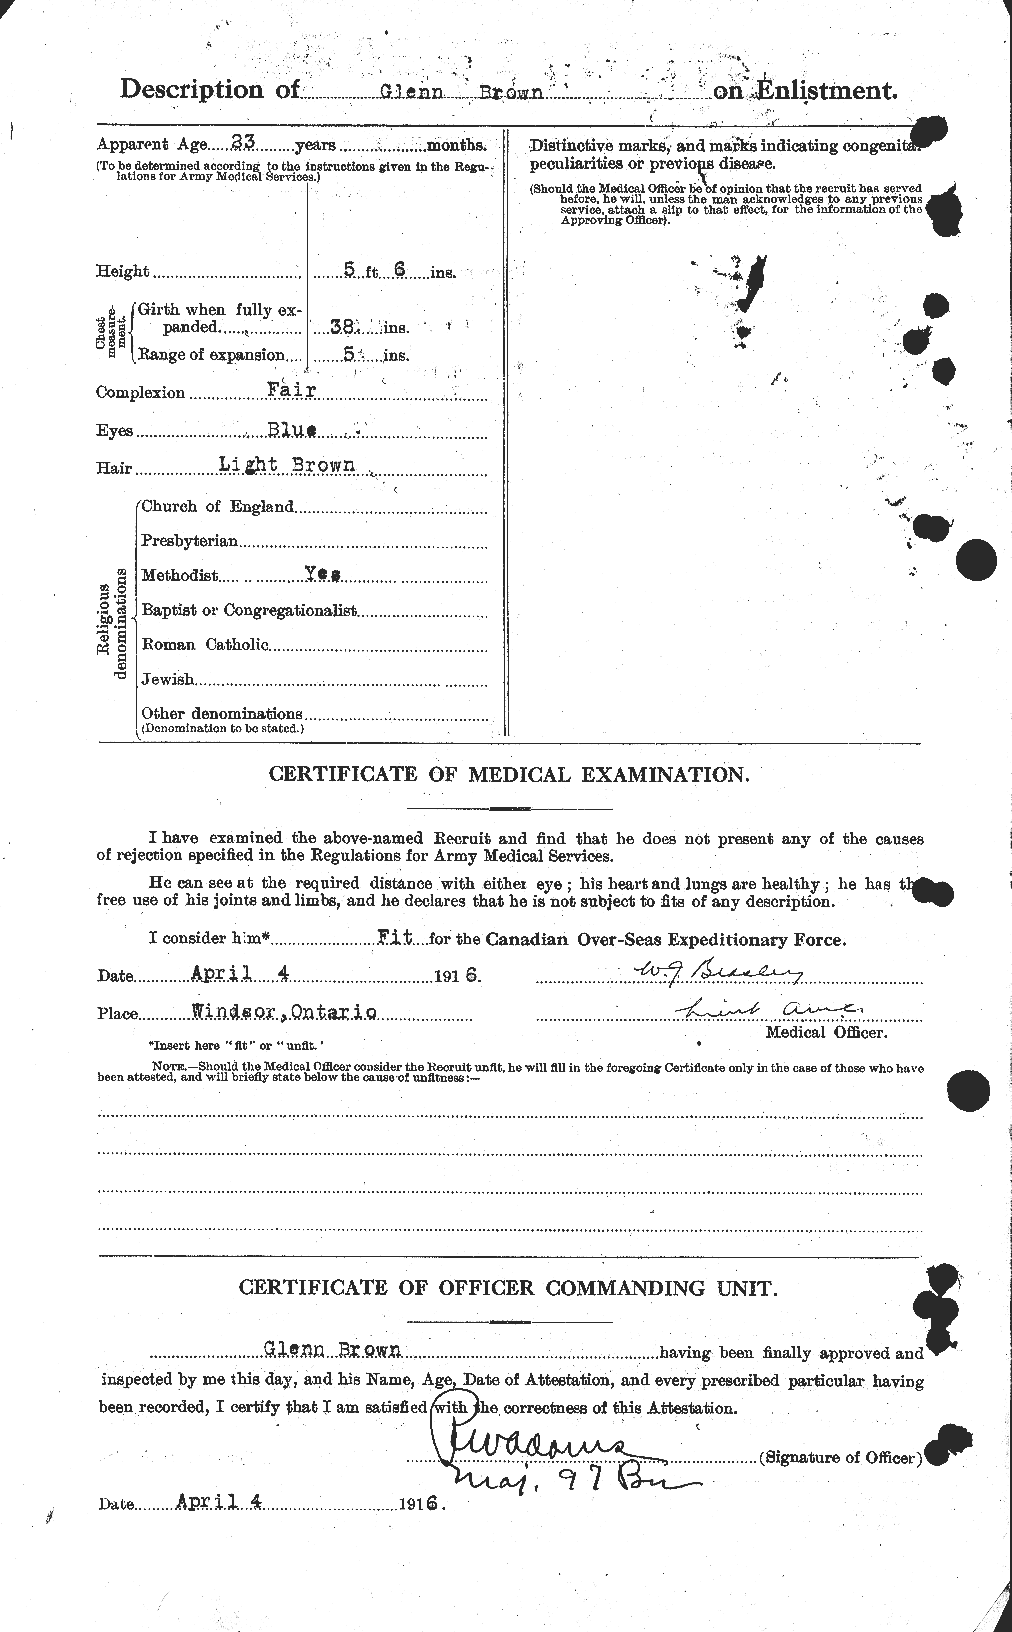 Personnel Records of the First World War - CEF 262617b